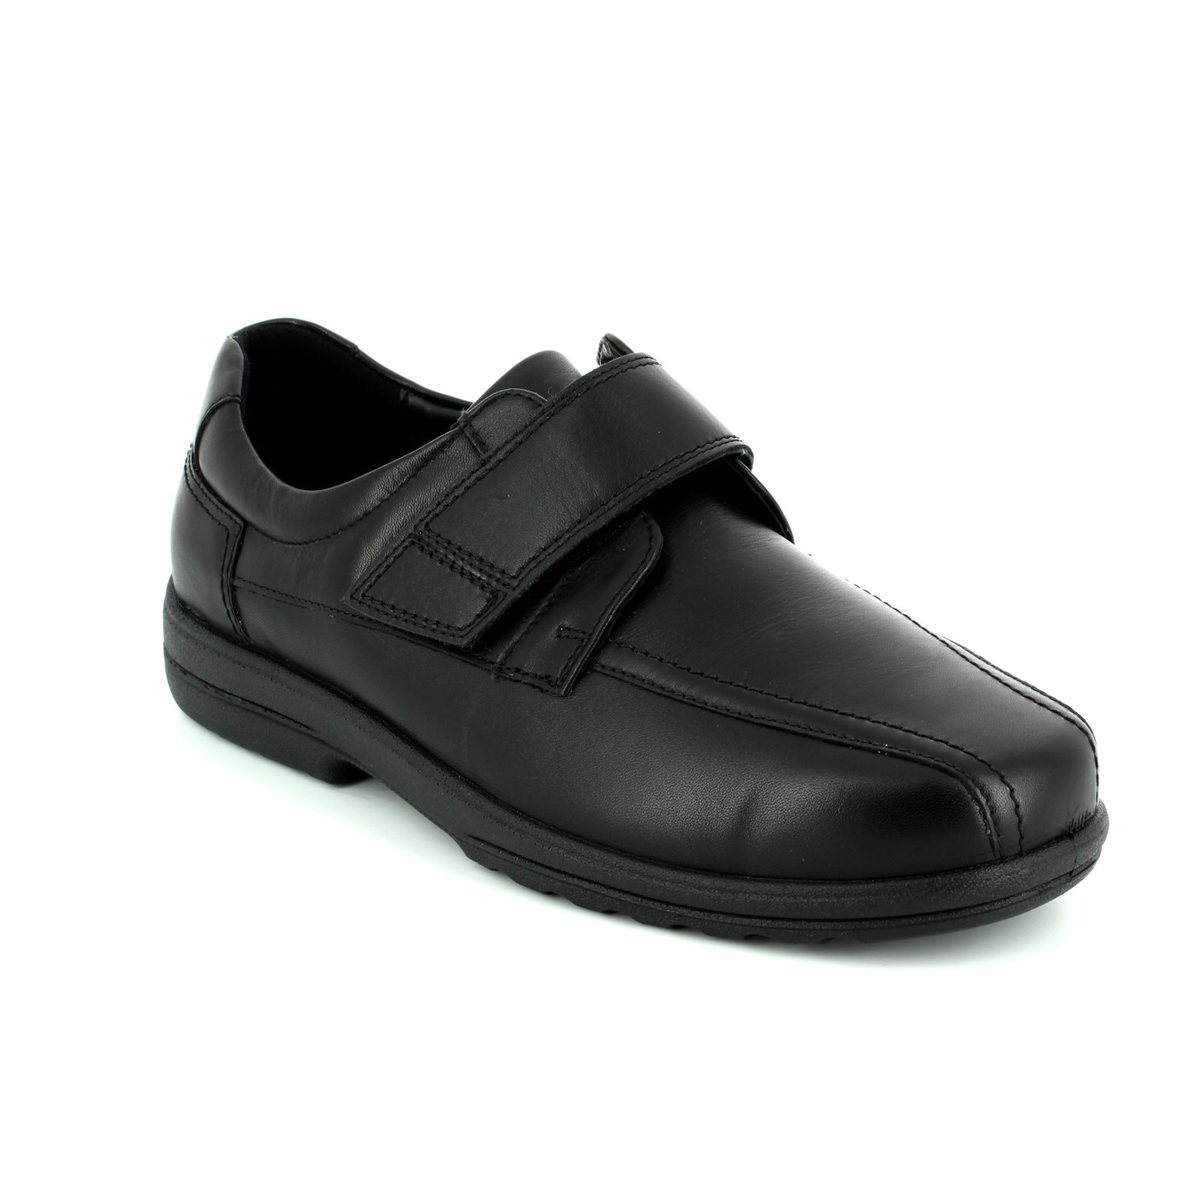 clarks padders shoes off 66% - online 